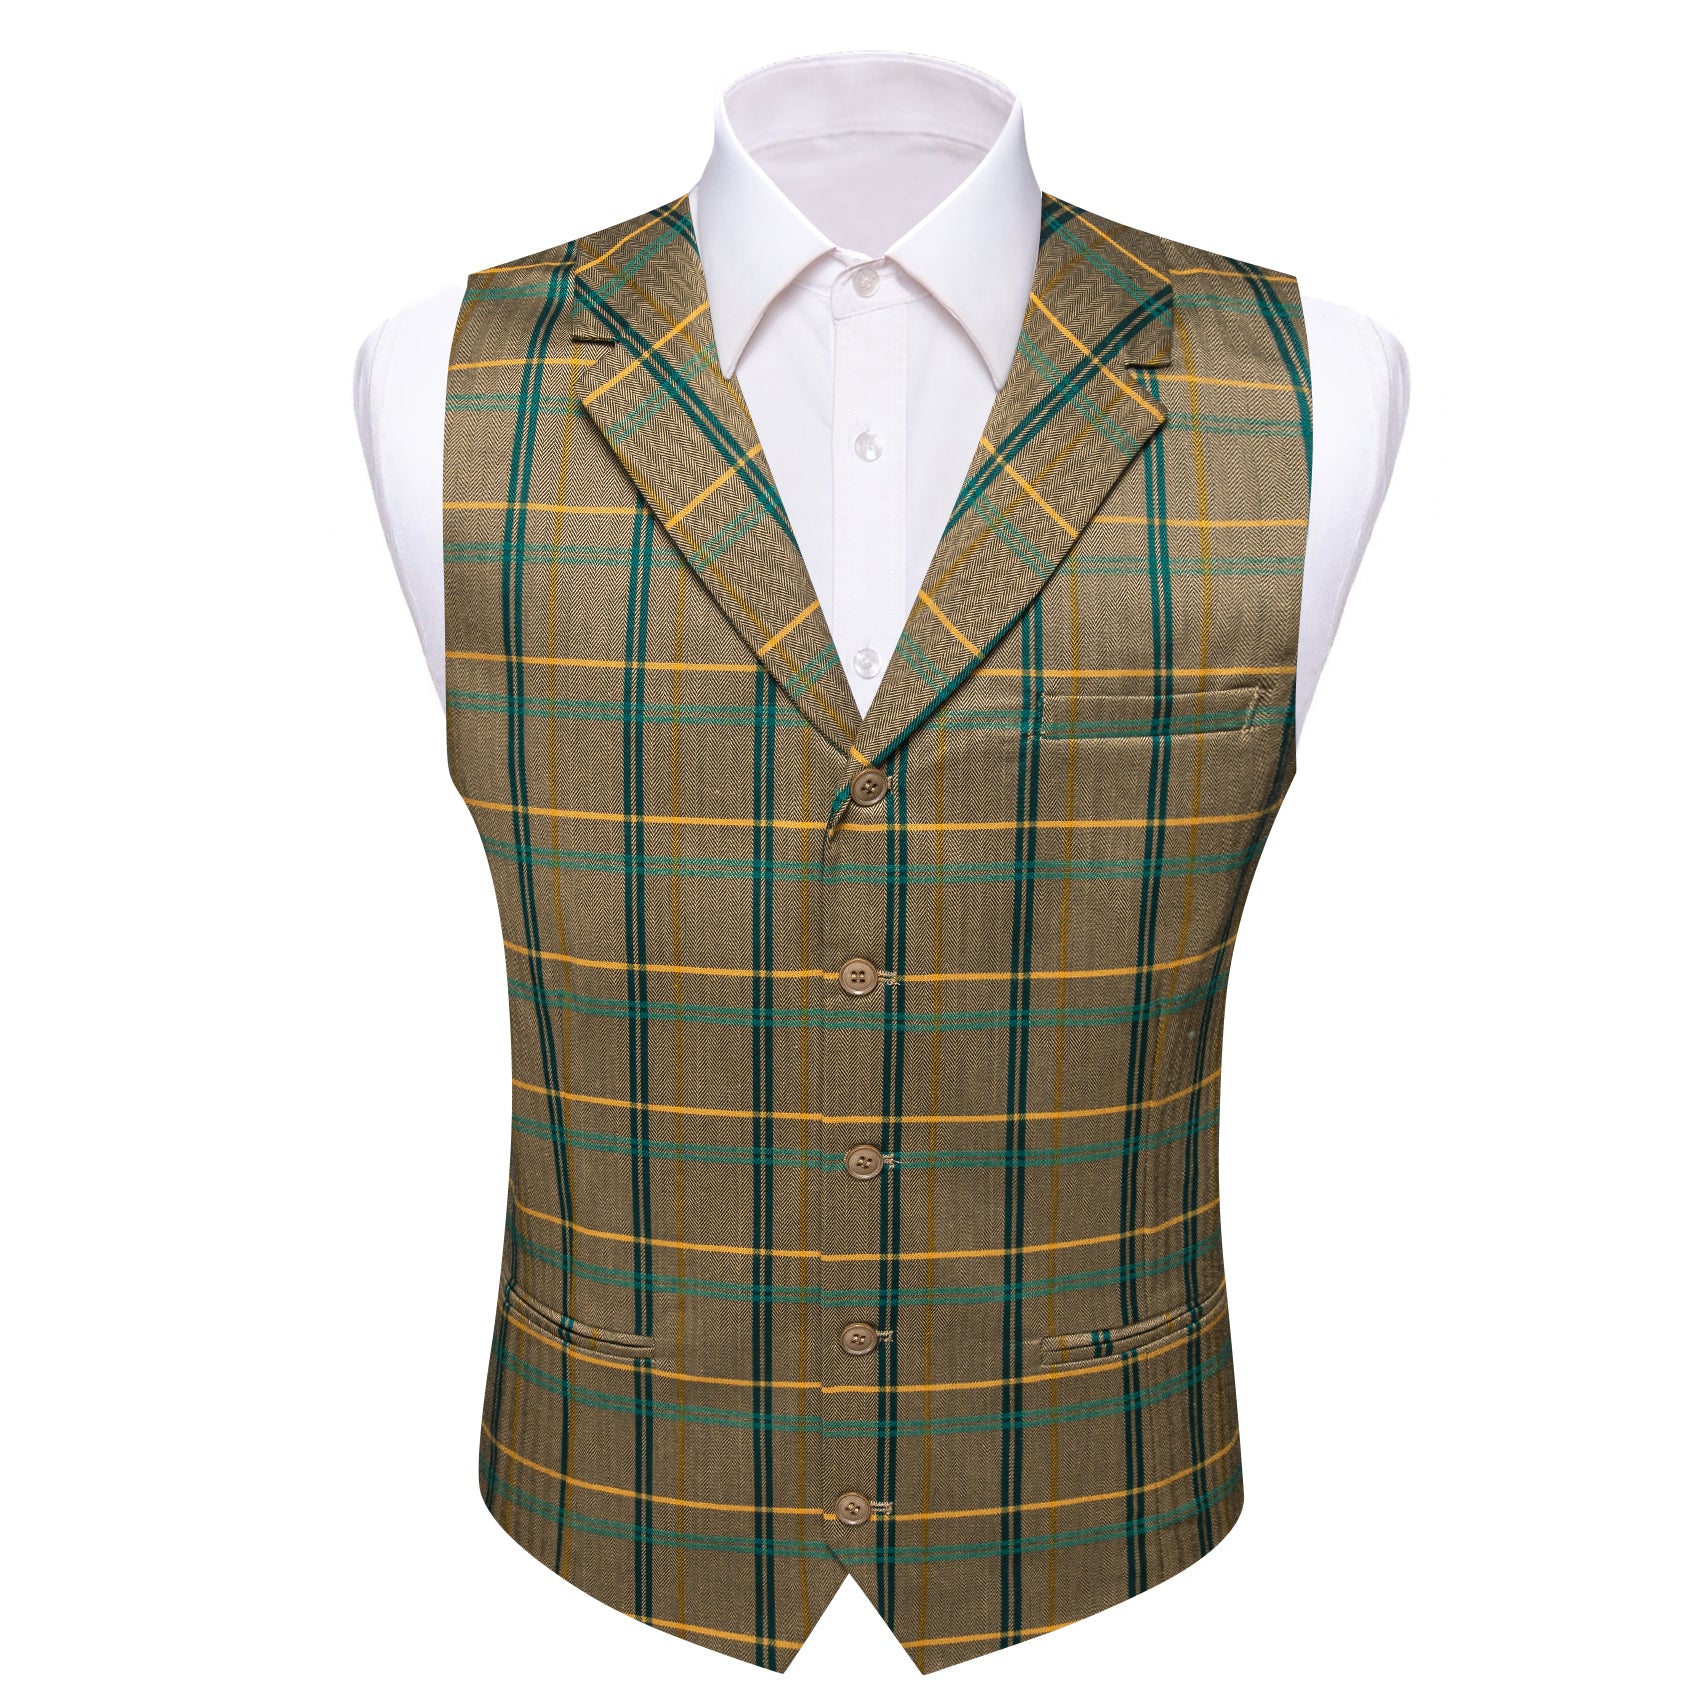 Barry.wang Yellow Green Smart Suit Vest With Lapel